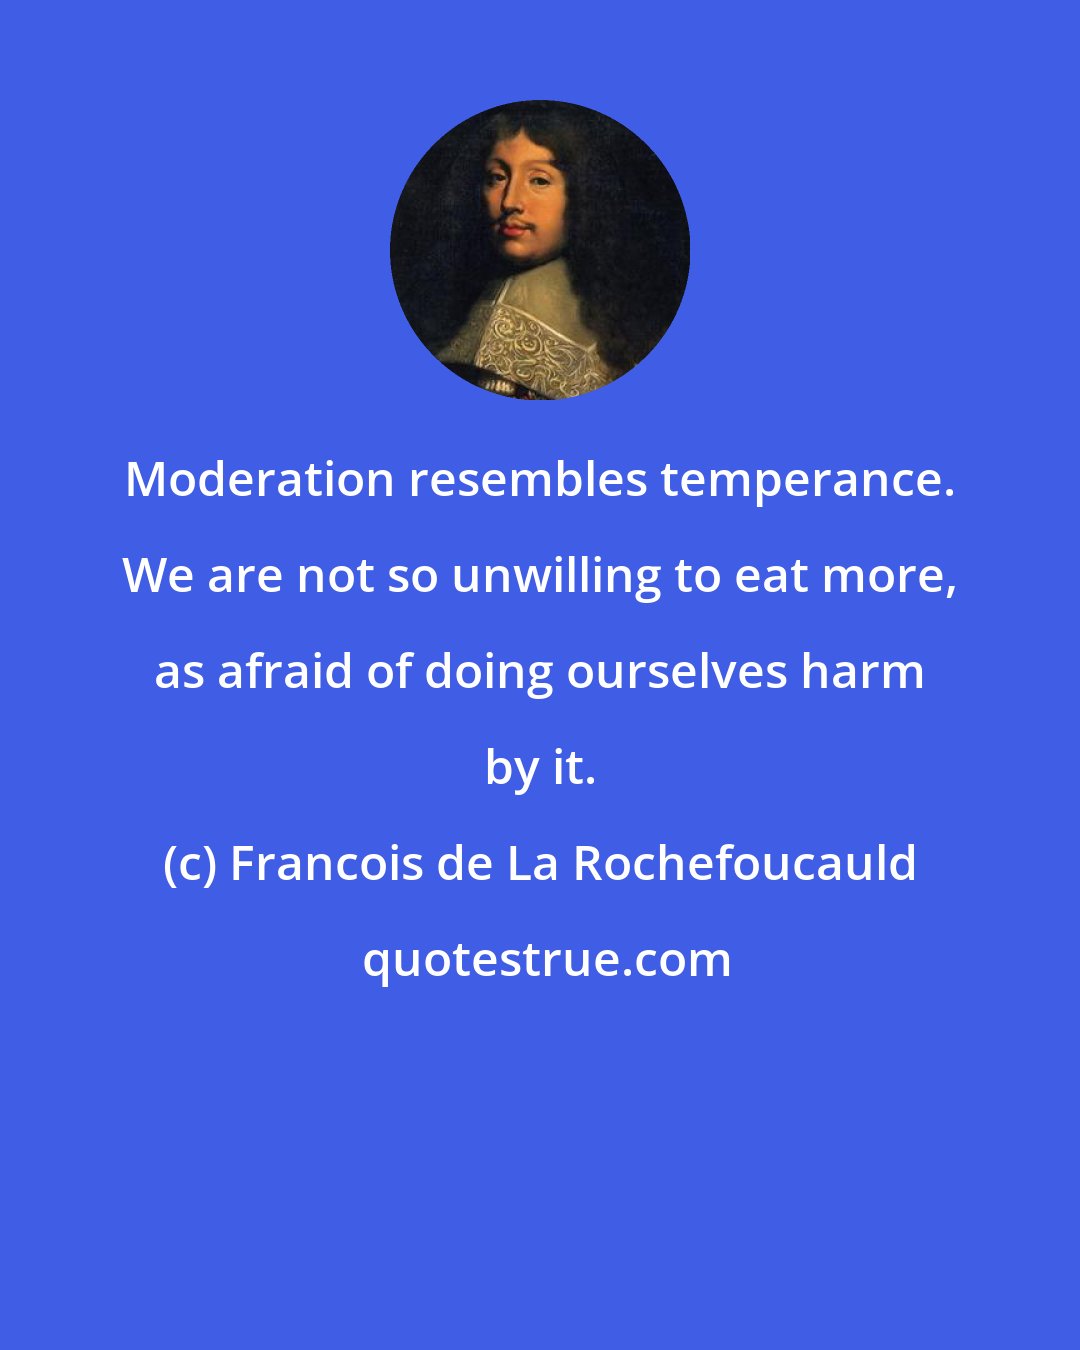 Francois de La Rochefoucauld: Moderation resembles temperance. We are not so unwilling to eat more, as afraid of doing ourselves harm by it.